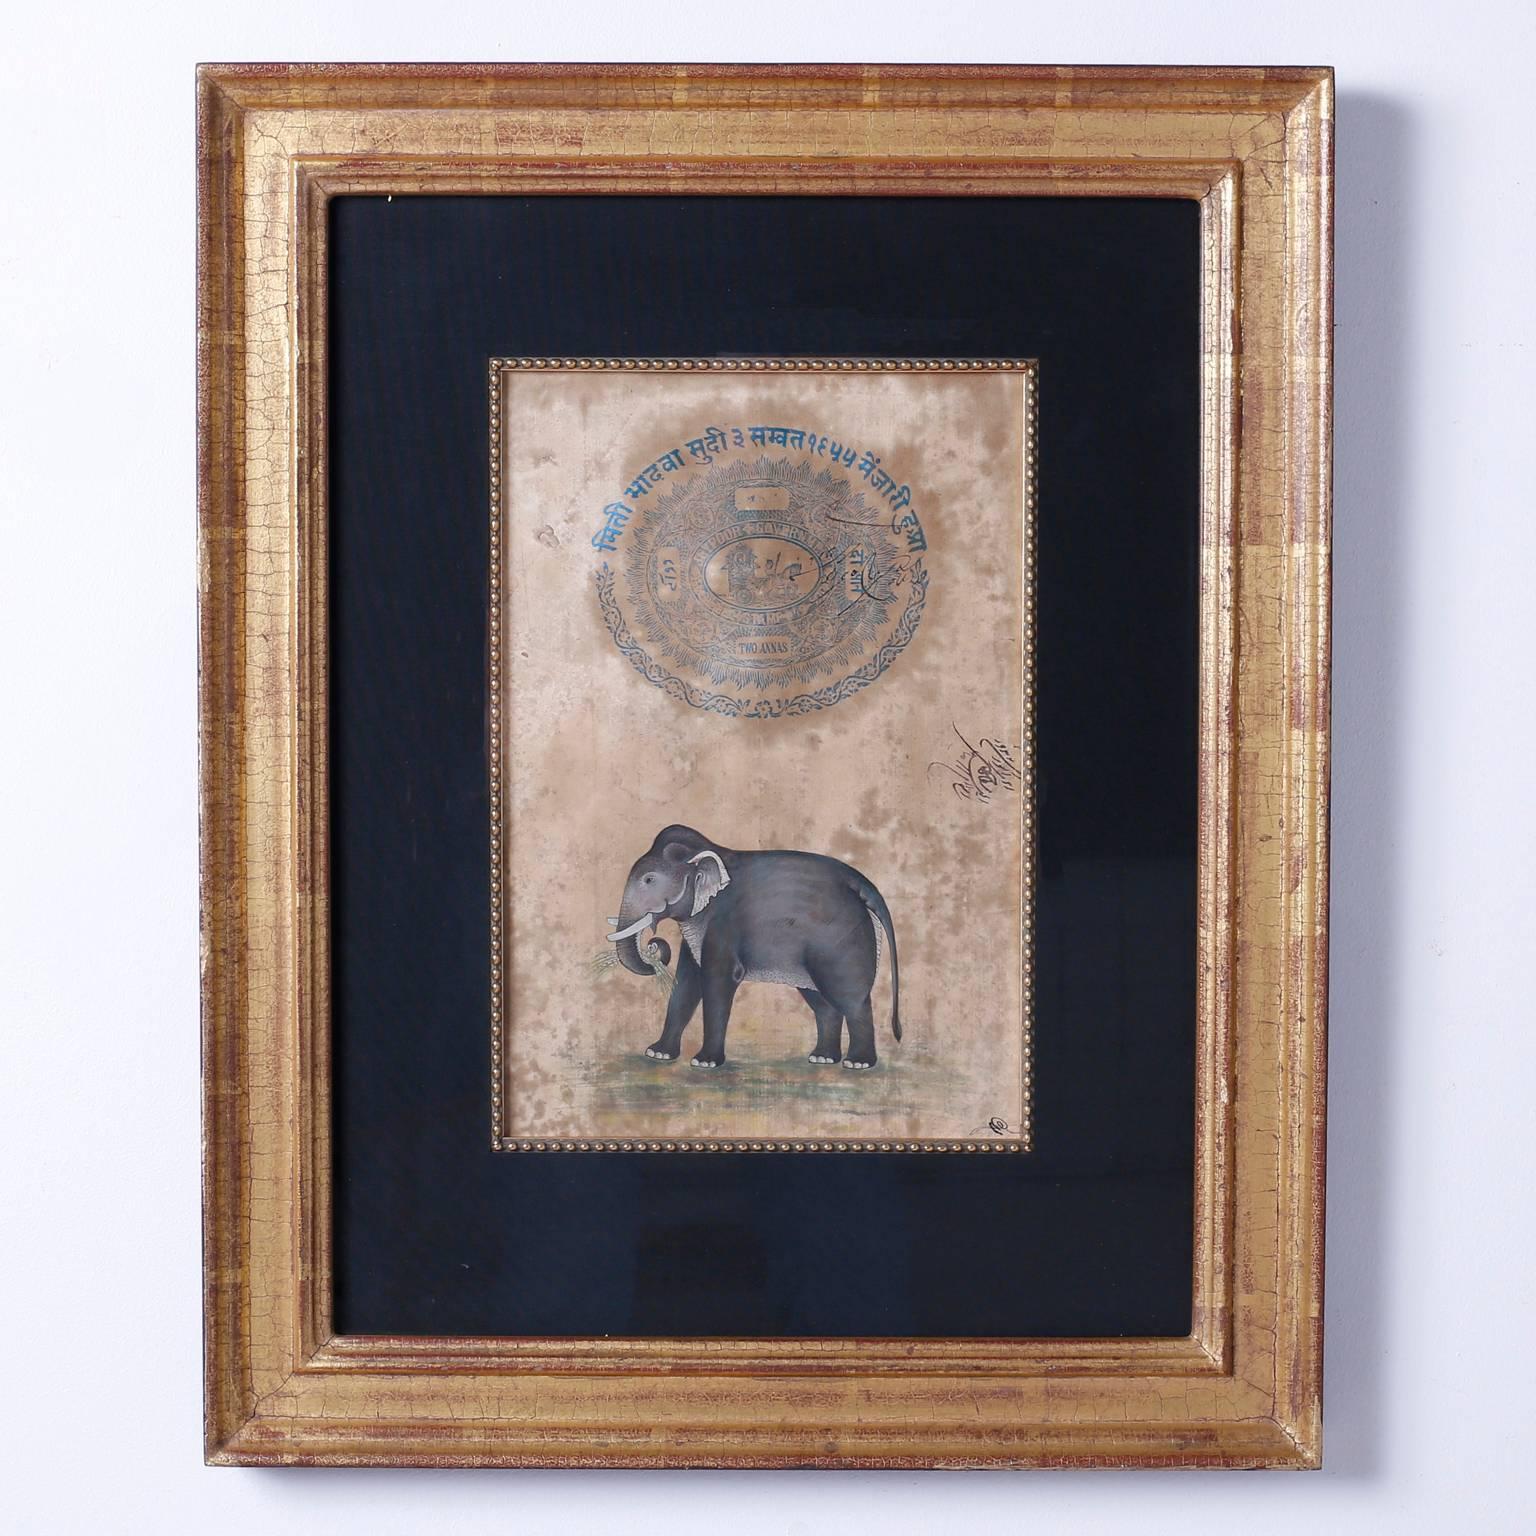 Set of four Jaipur animal watercolors with a charming naive style depicting some of India's most notorious creatures. Each image includes an official Jaipur government stamp and intriguing notes from the artist. Handsomely presented in carved wood,